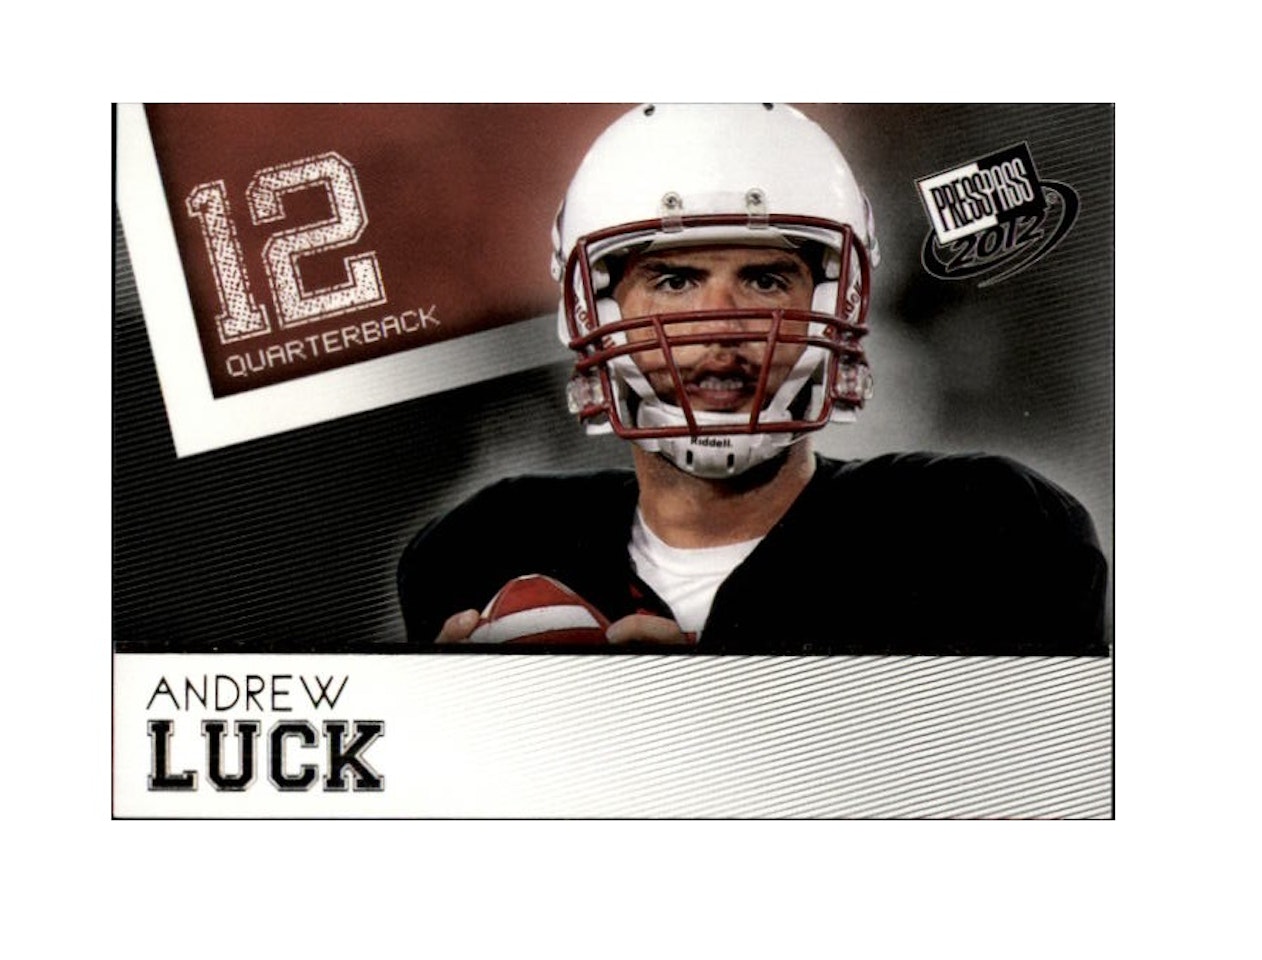 2012 Press Pass #30 Andrew Luck (5-D10-NFLCOLTS)